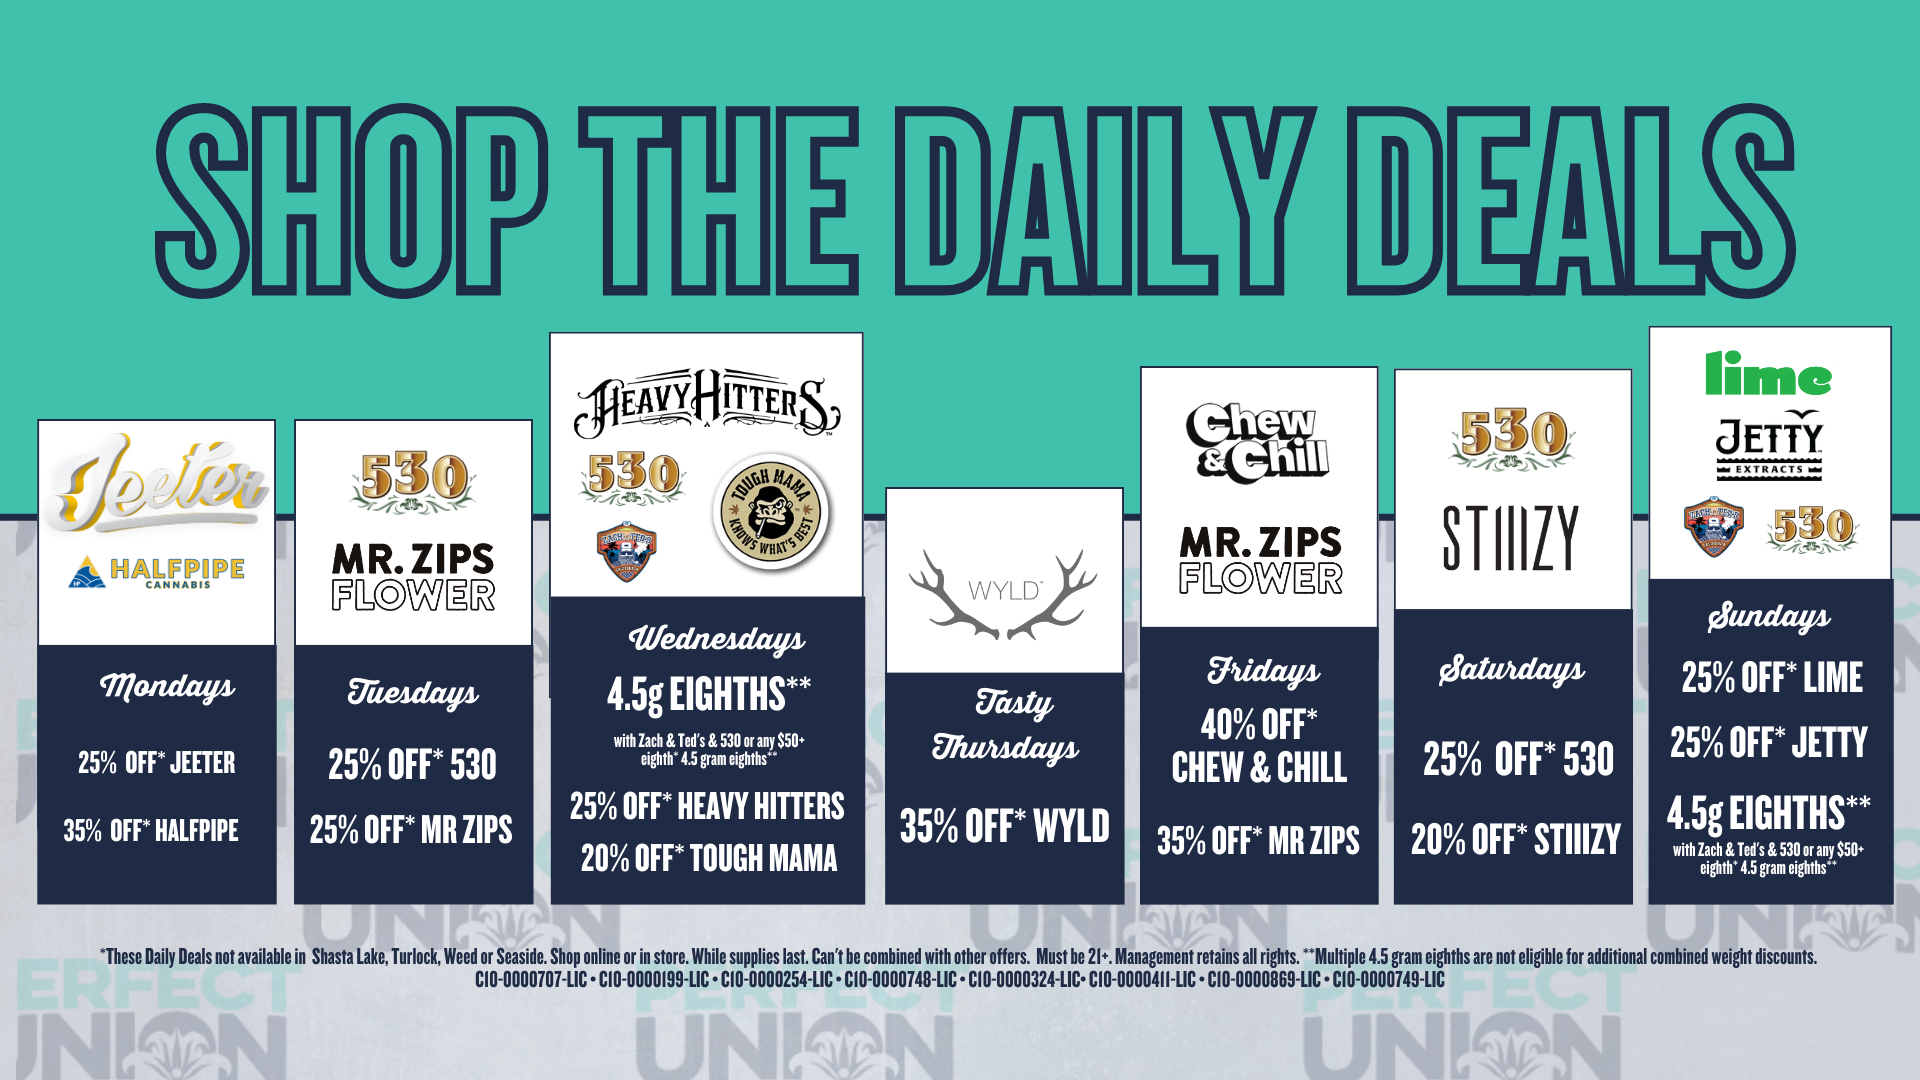 Perfect Union Daily Deals March 2023 Must Be 21+ Restrictions Apply